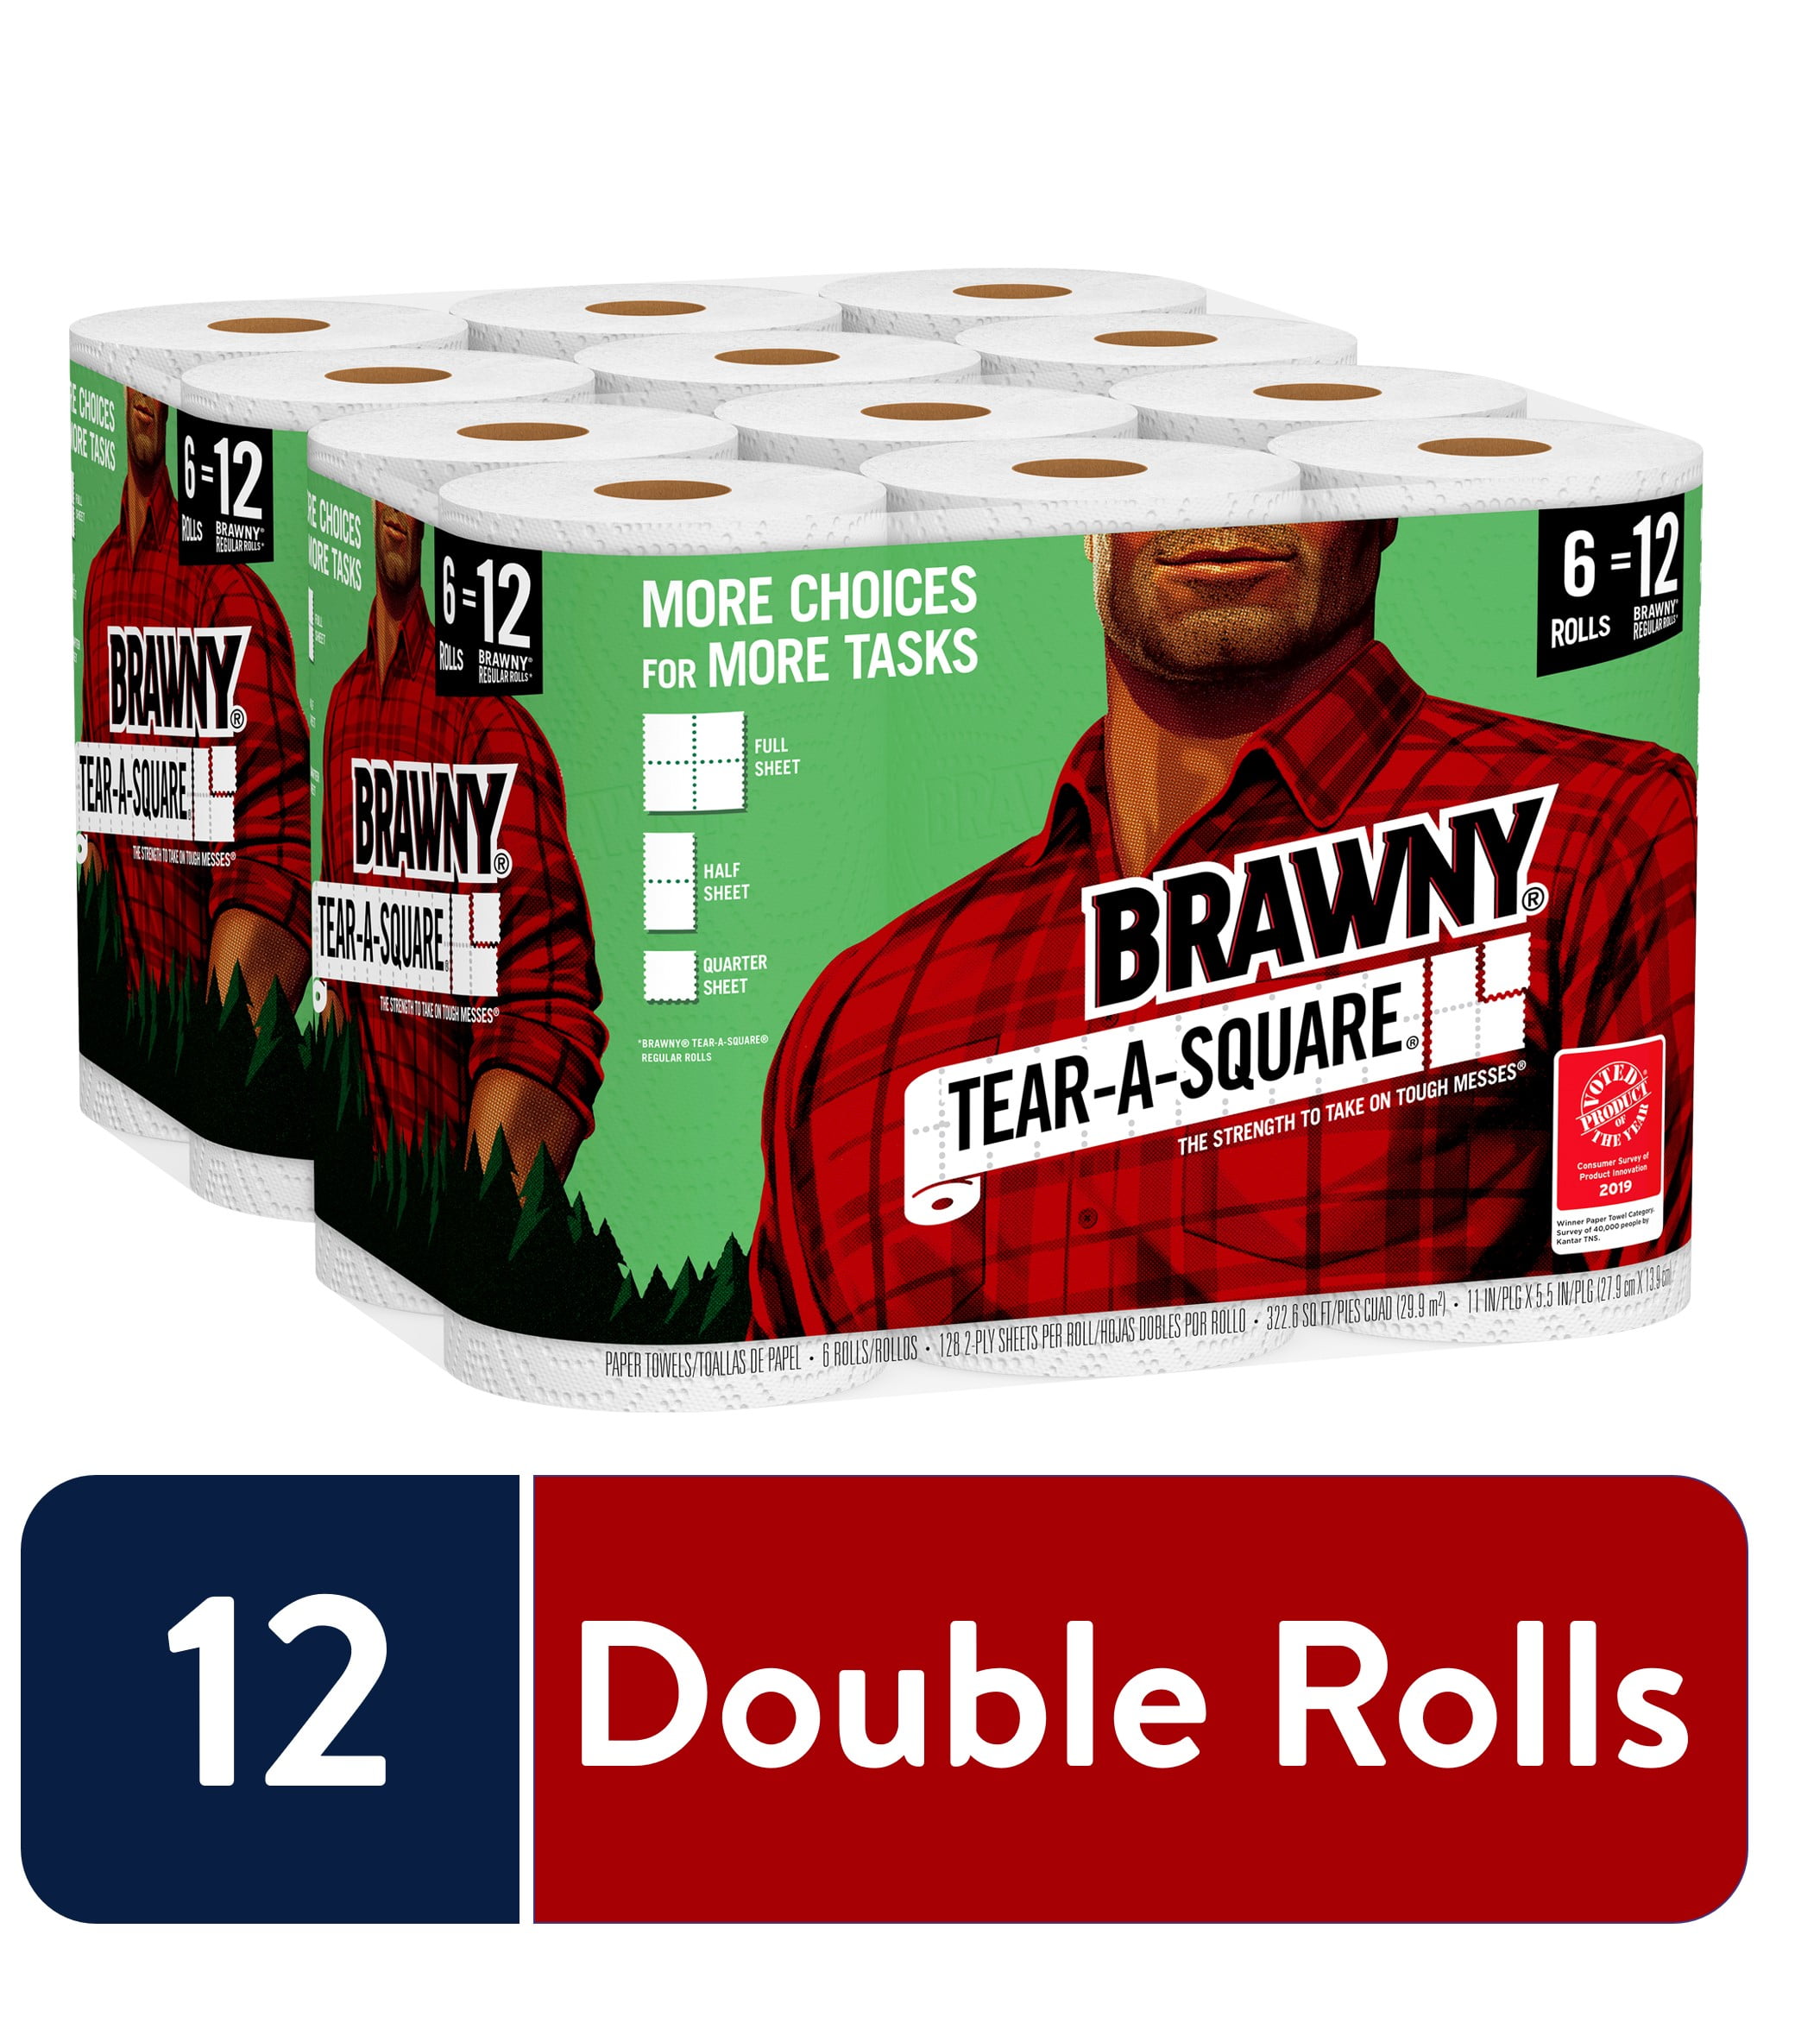 16 Double Rolls Brawny Tear-A-Square Paper Towels 